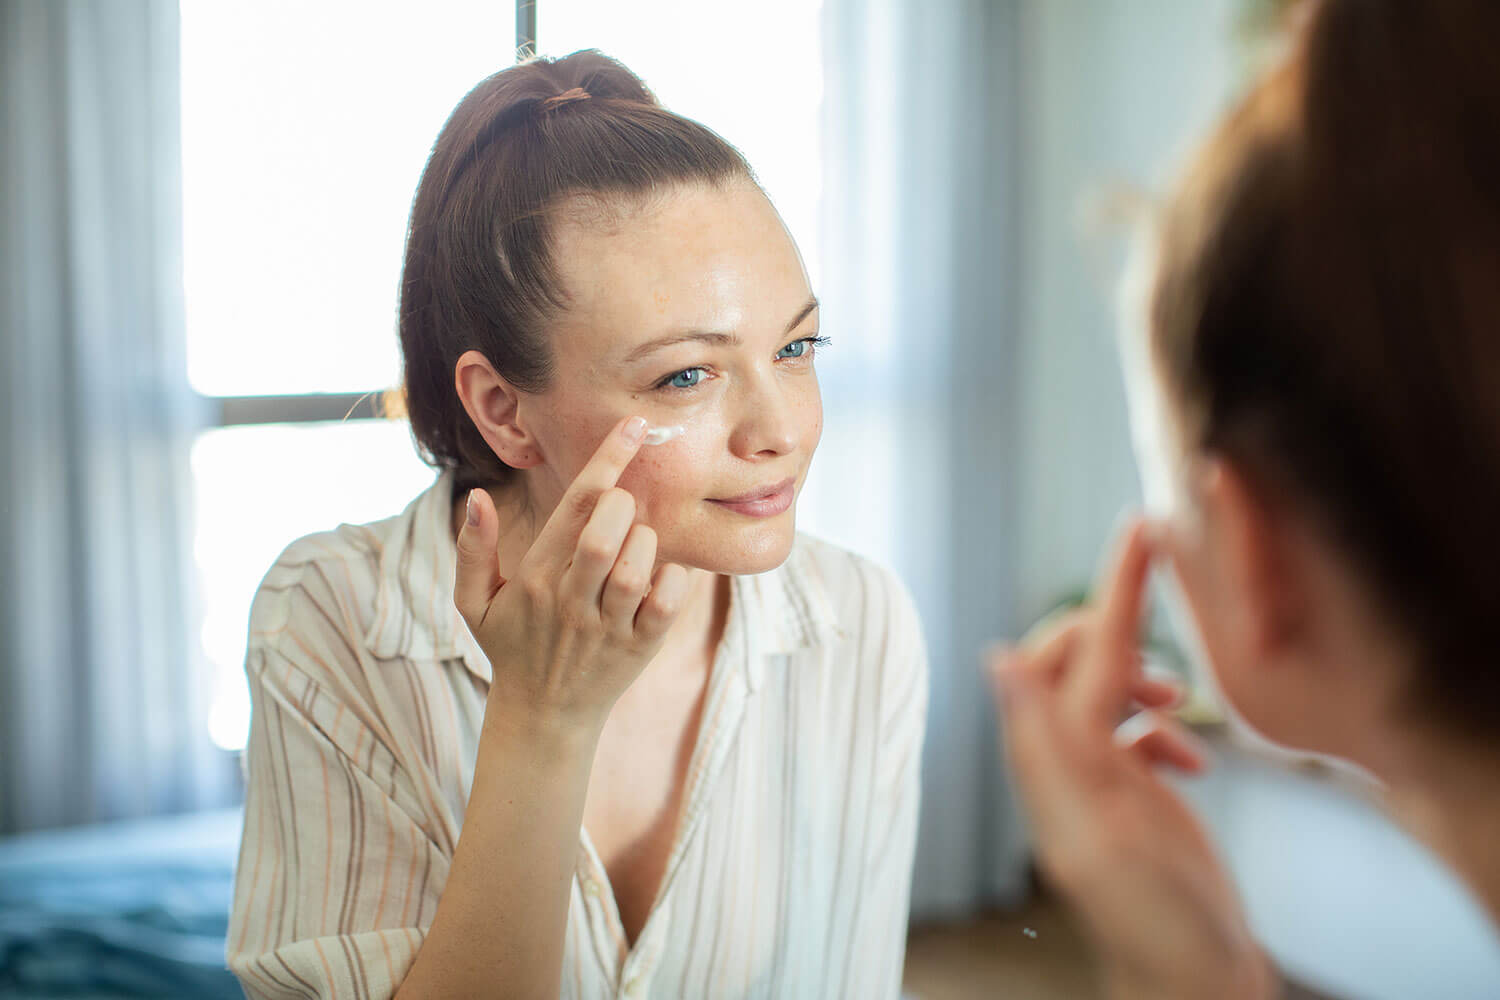 Essential Tips For Choosing the Best Night Cream. Young woman putting on makeup while looking in a mirror at home stock photo